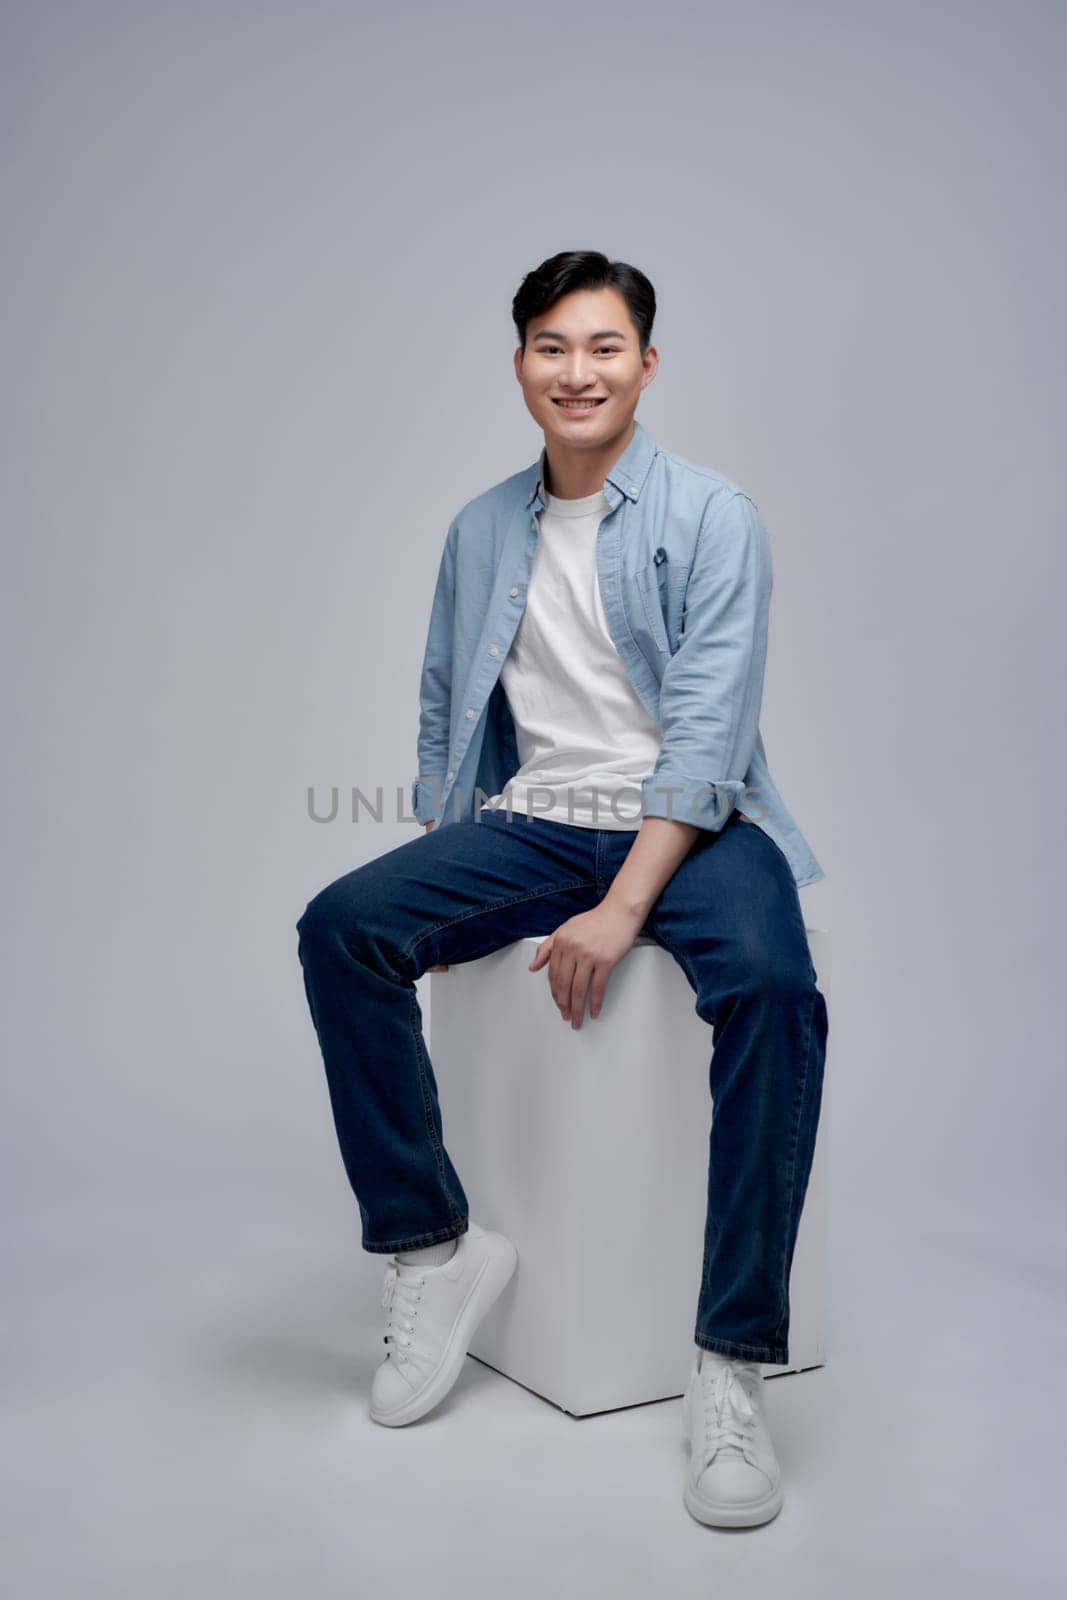 Young asian man posing while seated on box looking away from the camera in studio background